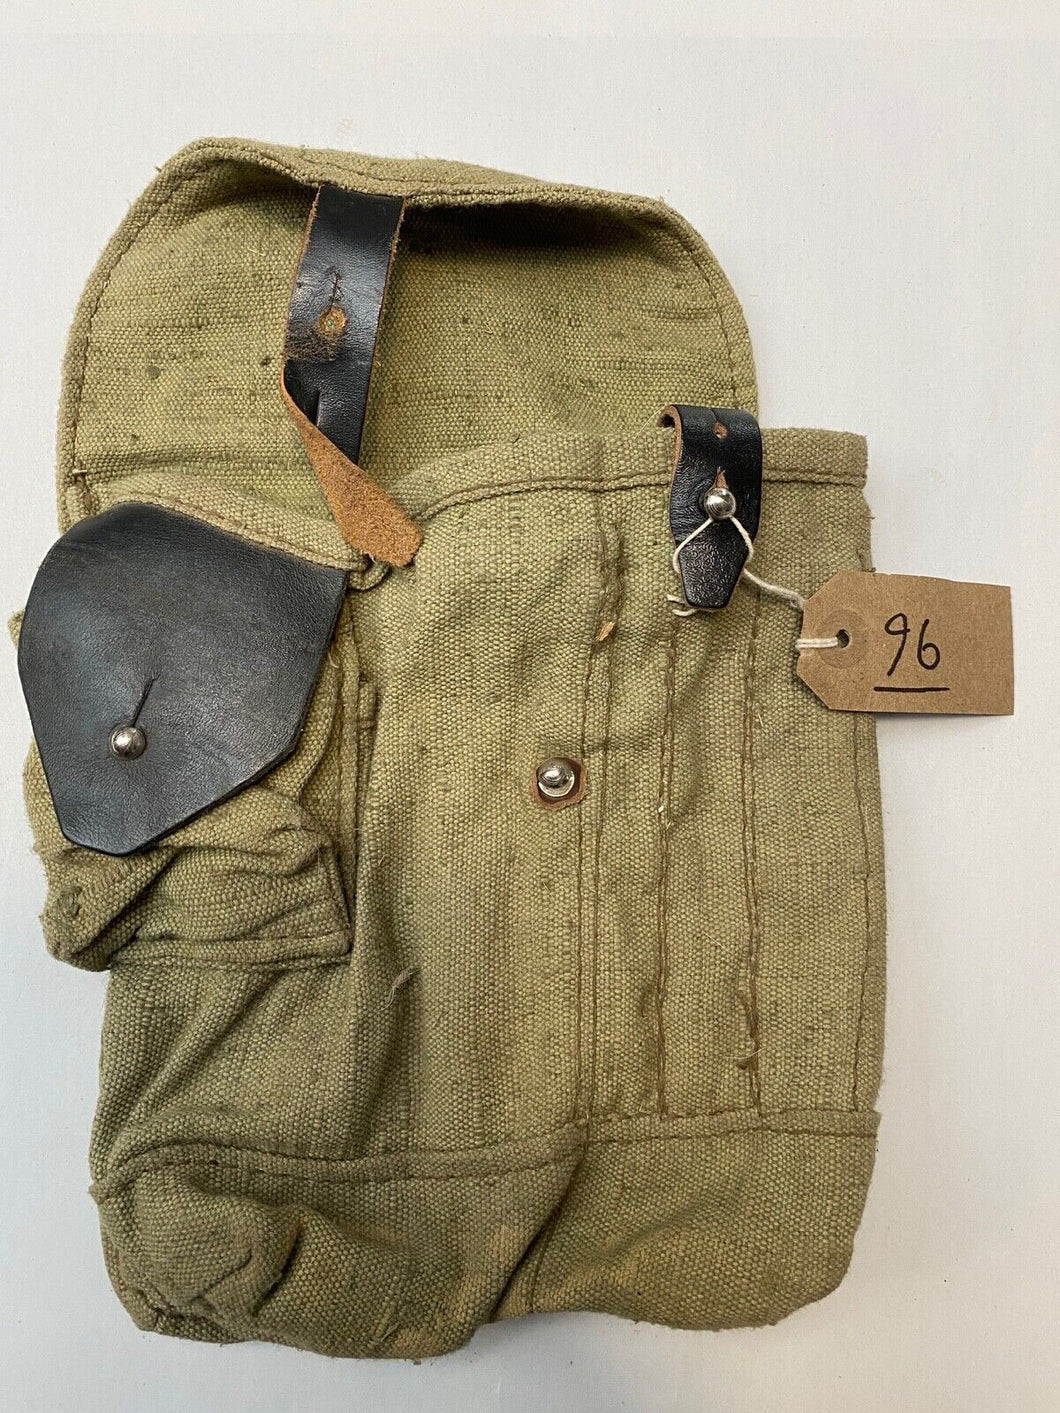 Yugoslavian Army M70 (or similar) canvas & leather pouch in great condition